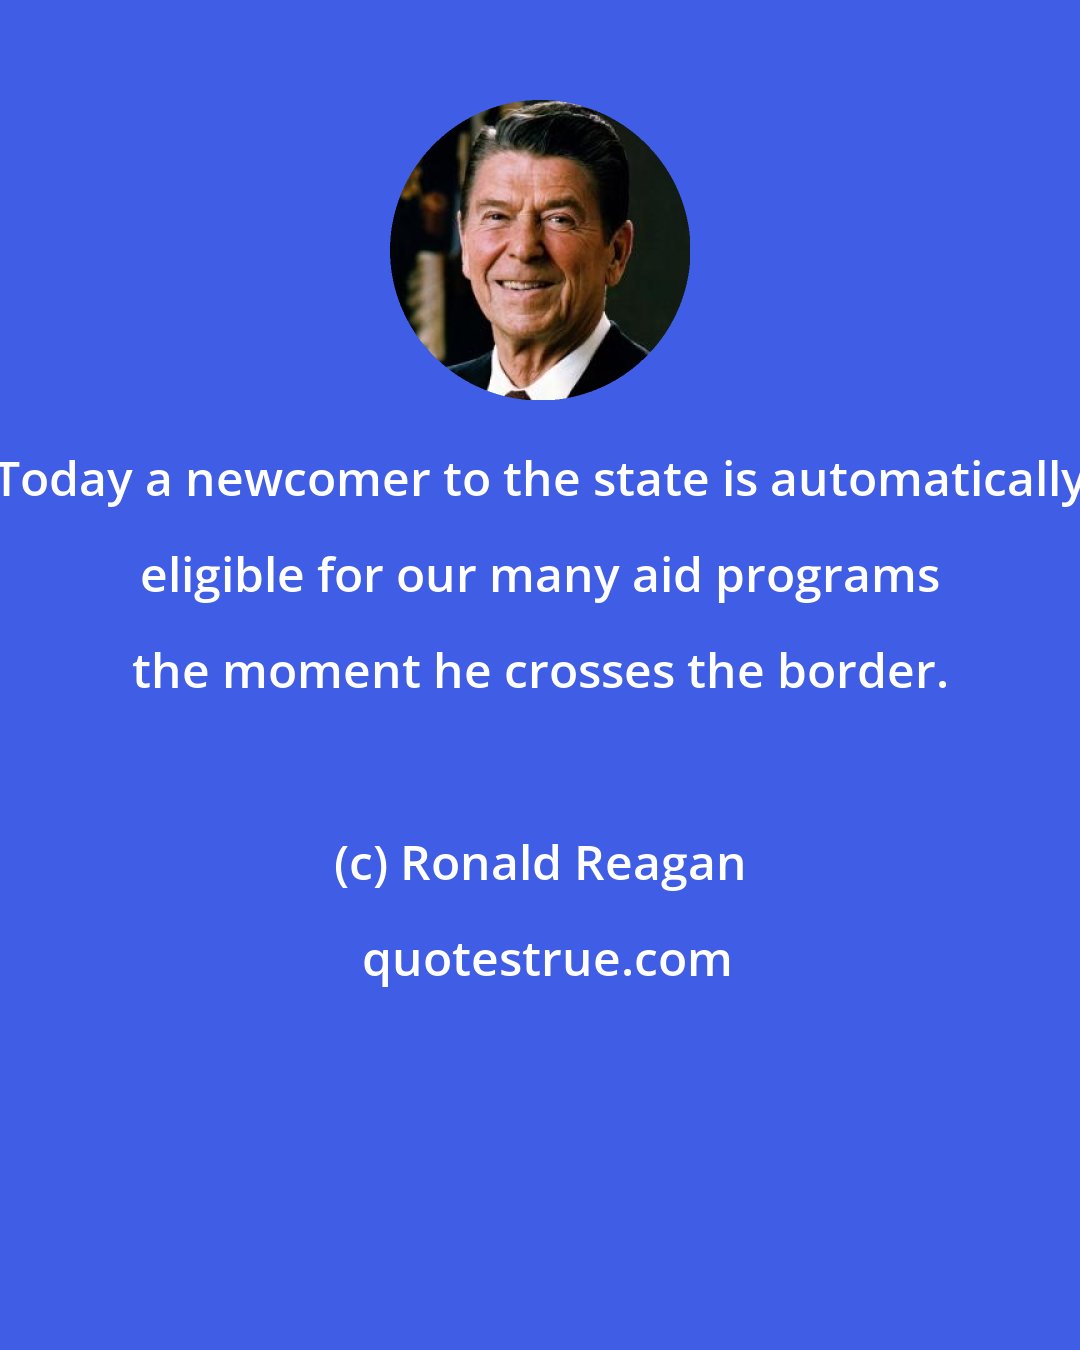 Ronald Reagan: Today a newcomer to the state is automatically eligible for our many aid programs the moment he crosses the border.